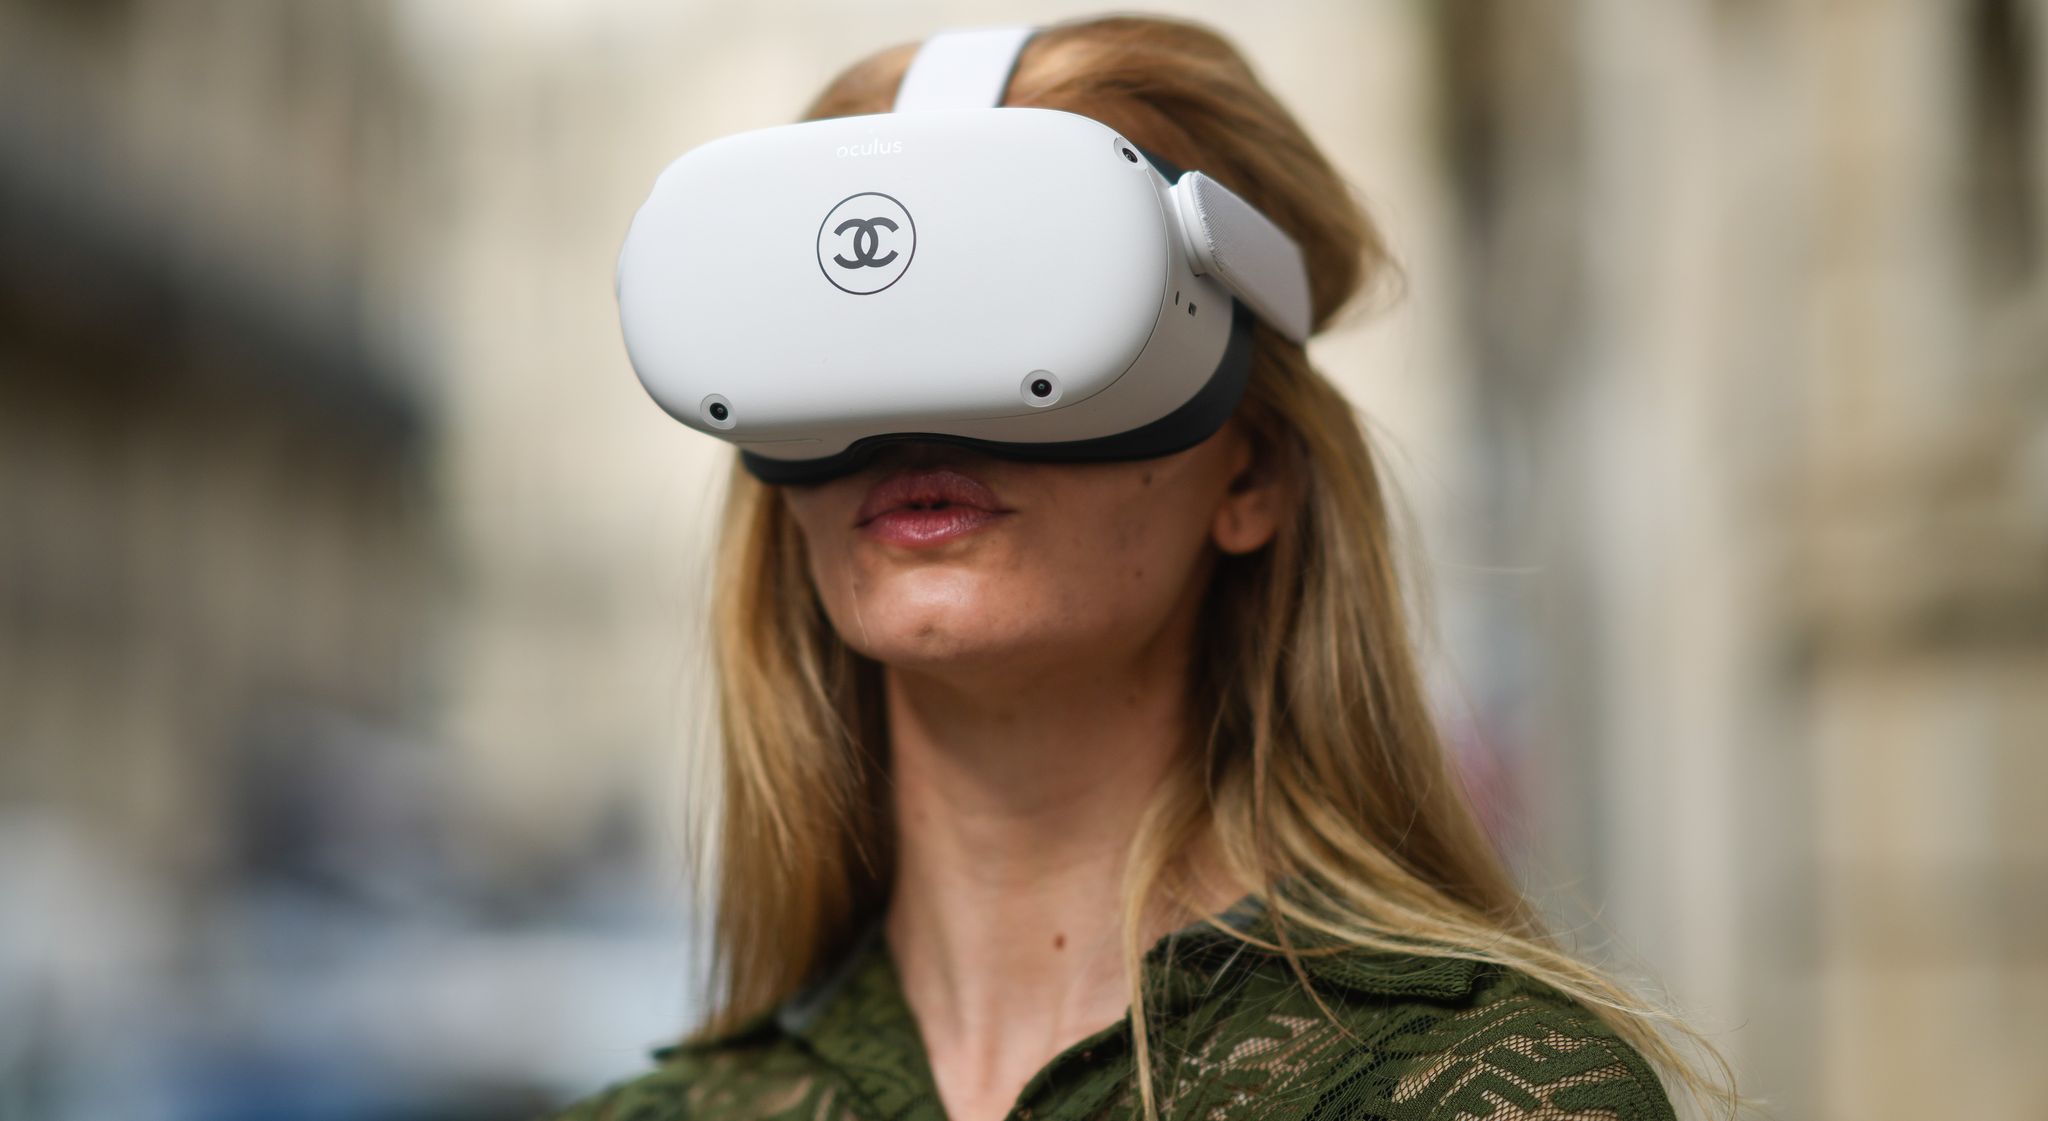 paris, france   june 04 natalia verza mascaradaparis wears a green khaki mesh jumpsuit from fendi with embroidered logo  monograms, and is playing with a vr  virtual reality oculus quest headset with a printed chanel logo, and equipped with 2 controllers, on june 04, 2021 in paris, france photo by edward berthelotgetty images